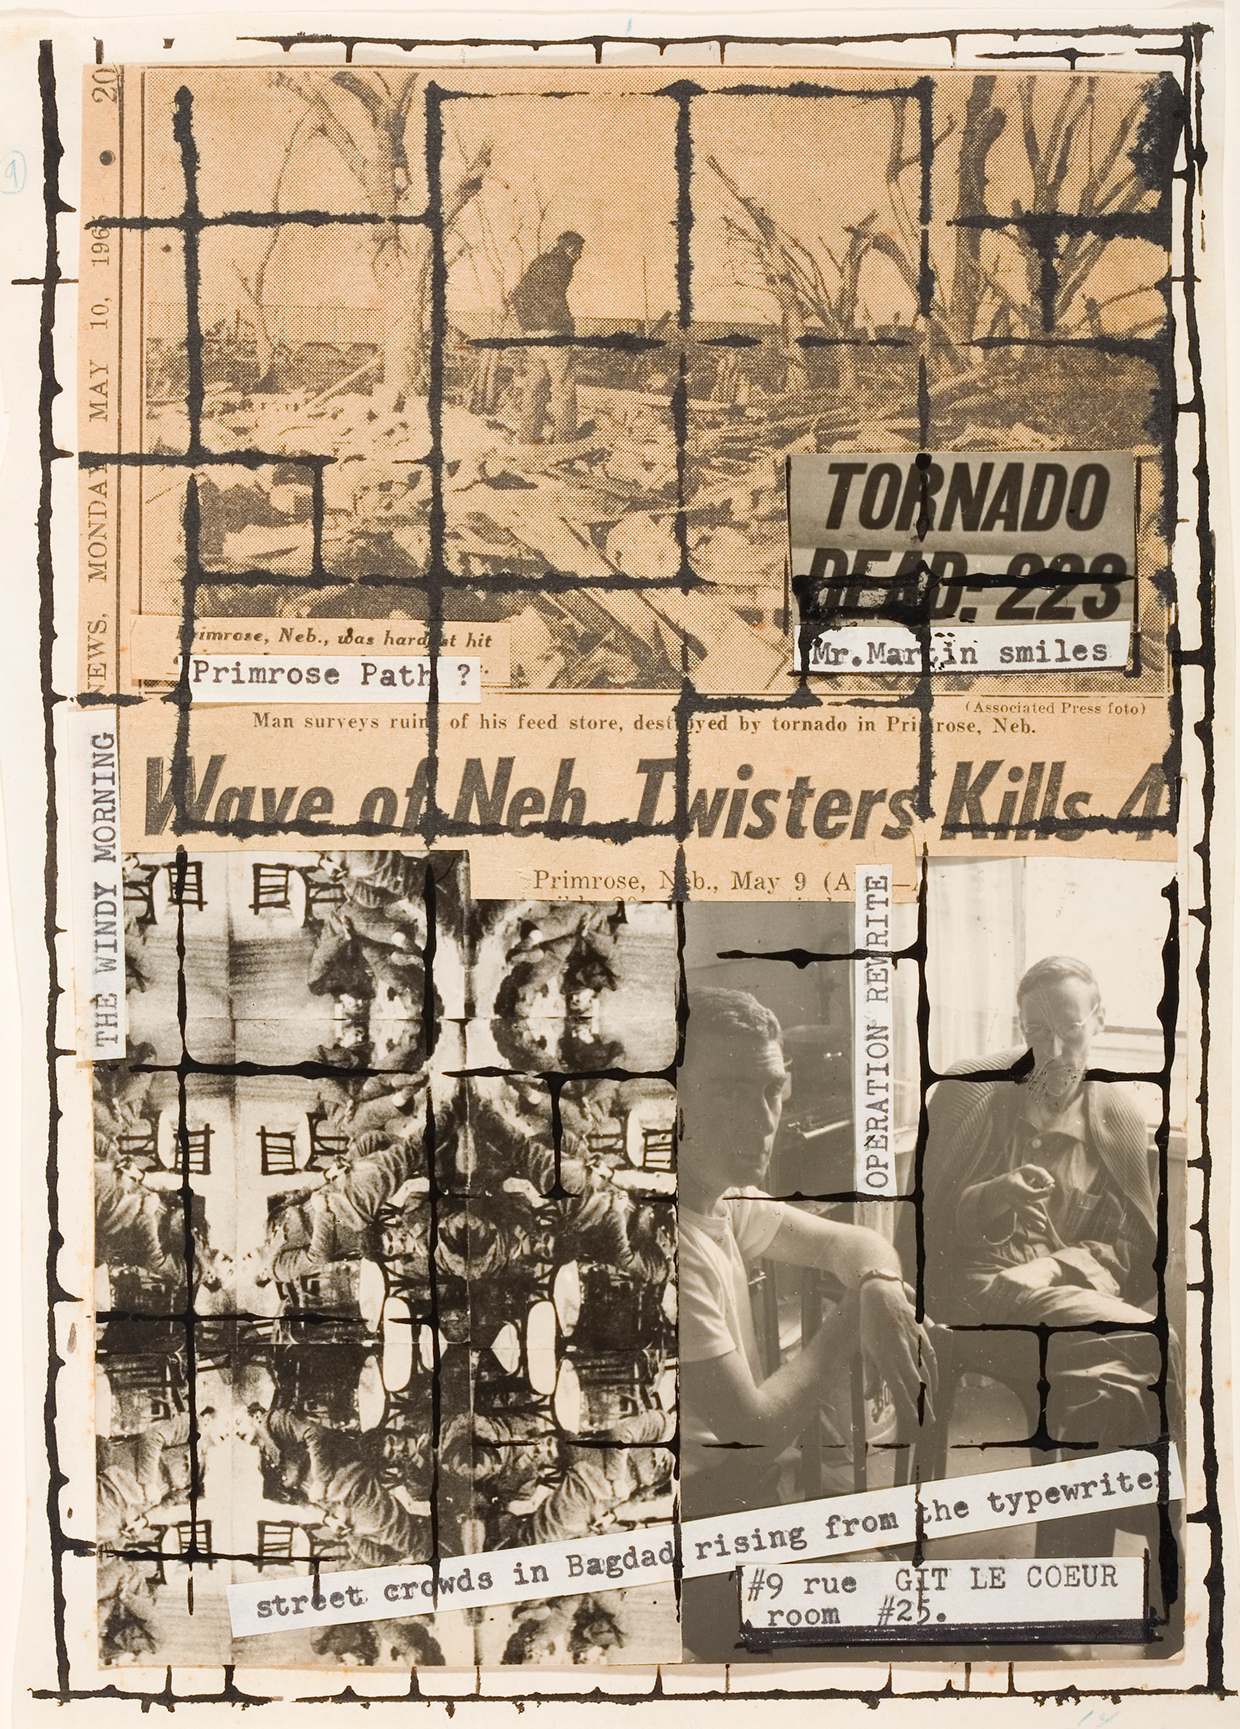 The Beat Generation members often worked collaboratively on works. Here, William Burroughs and Brion Gysin worked together on a "cut-up" piece, a type of collage with text pioneered by Gysin and refined by Burroughs. © Archives Galerie de France